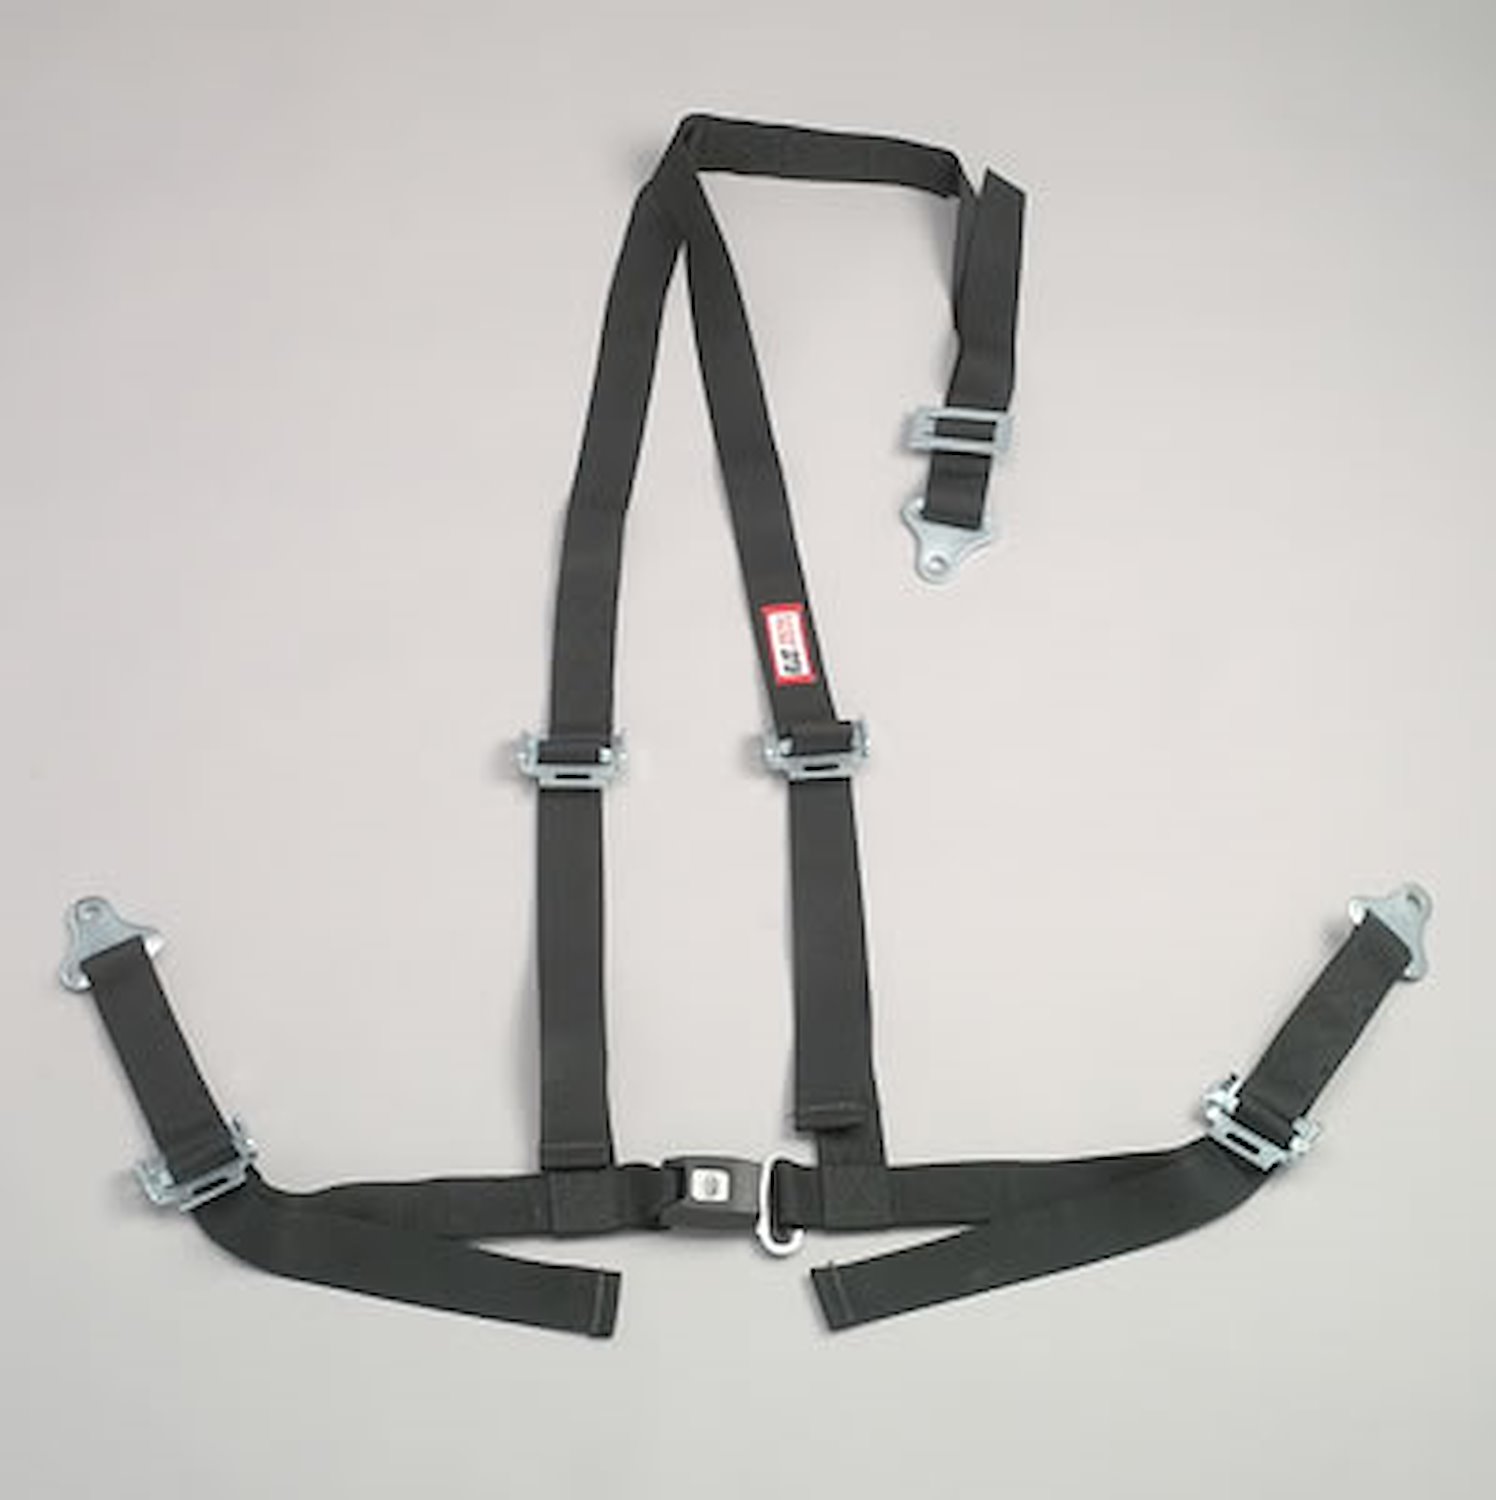 NON-SFI B&T HARNESS 2 PULL UP Lap Belt SNAP 2 S. H. Y FLOOR Mount WRAP/BOLT w/STERNUM STRAP GRAY